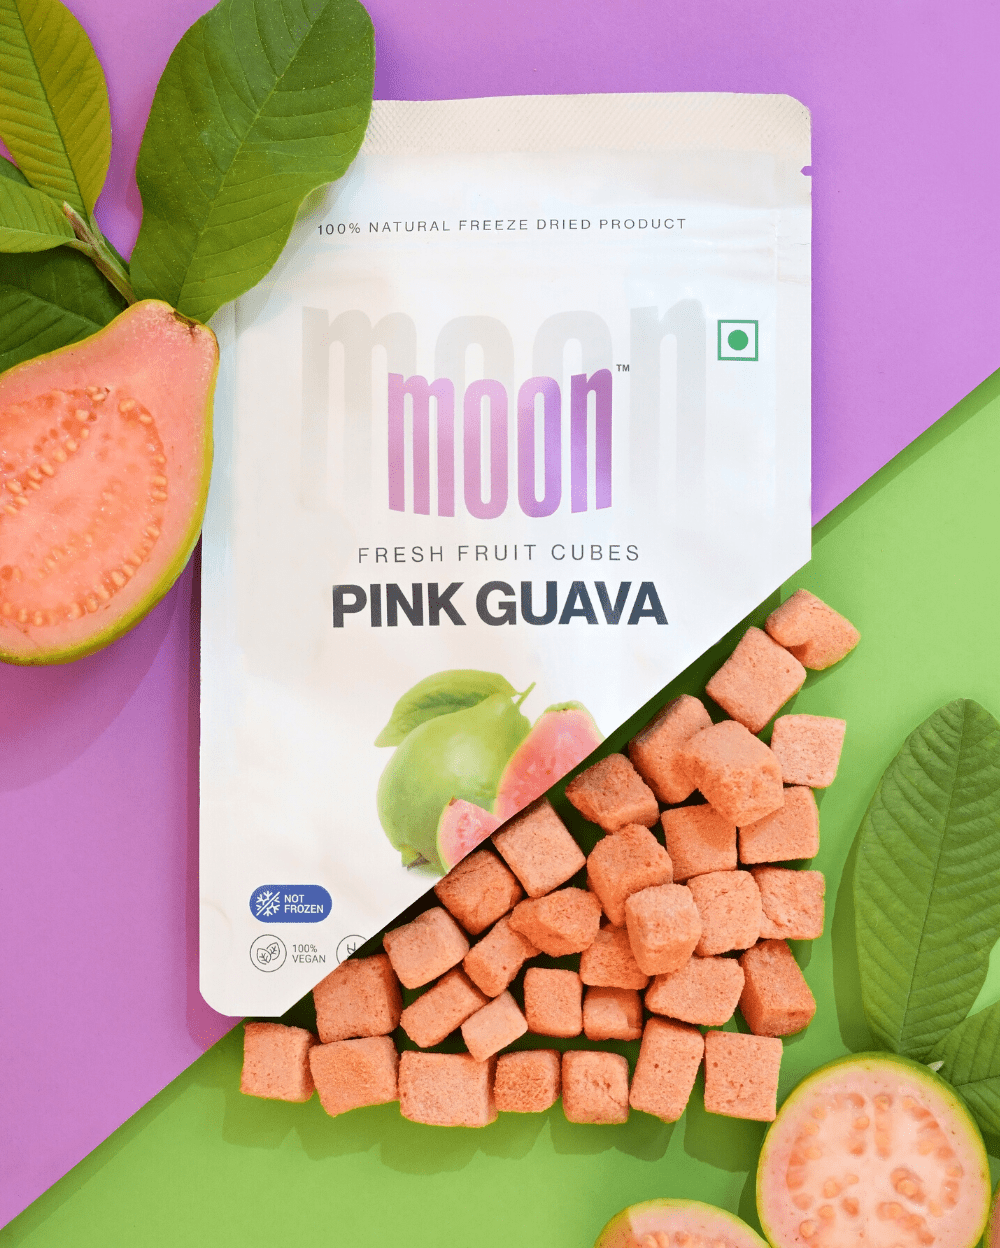 A package of MOONFREEZE FOODS PRIVATE LIMITED's Moon Freeze Dried Pink Guava cubes - Pack of 4, infused with exotic tropical flavor, displayed with fresh guava fruit on a dual-tone background.